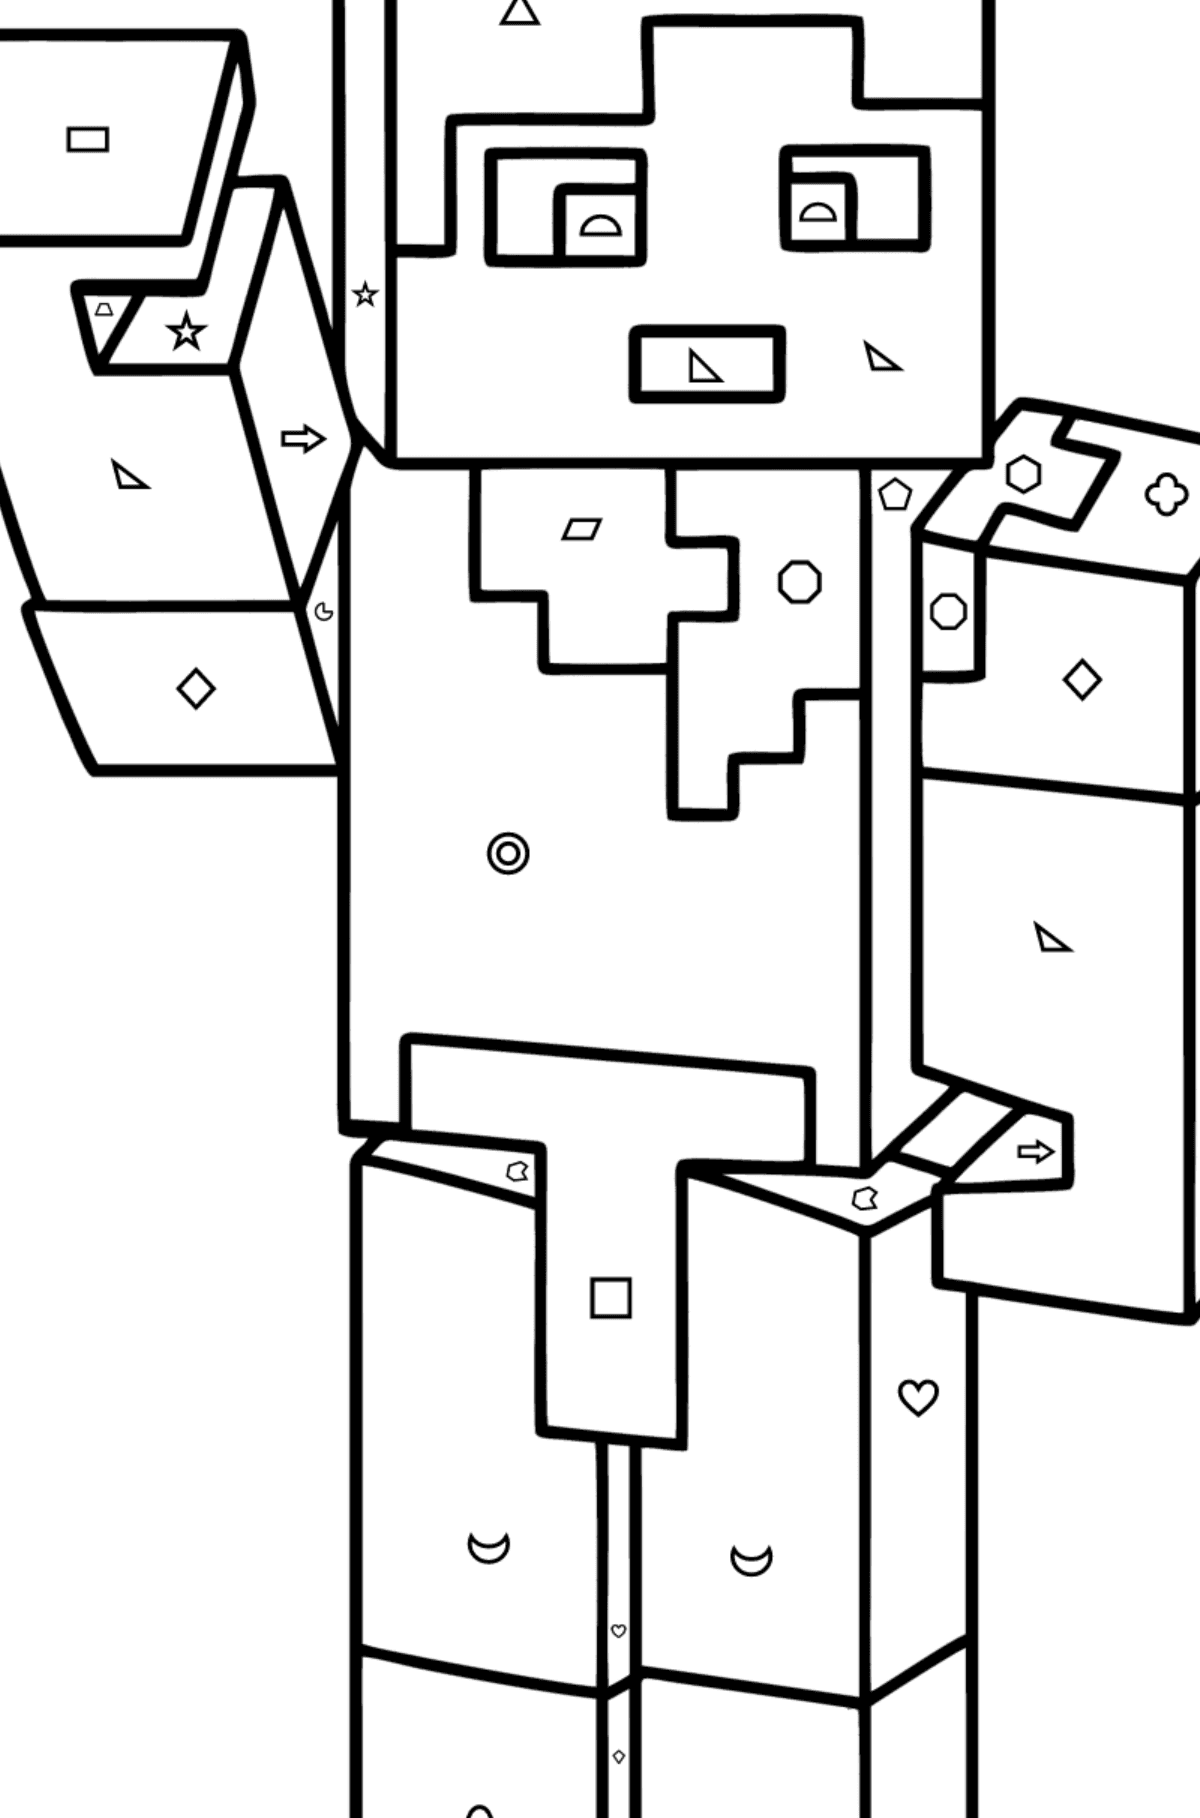 Minecraft Alex coloring page - Coloring by Geometric Shapes for Kids